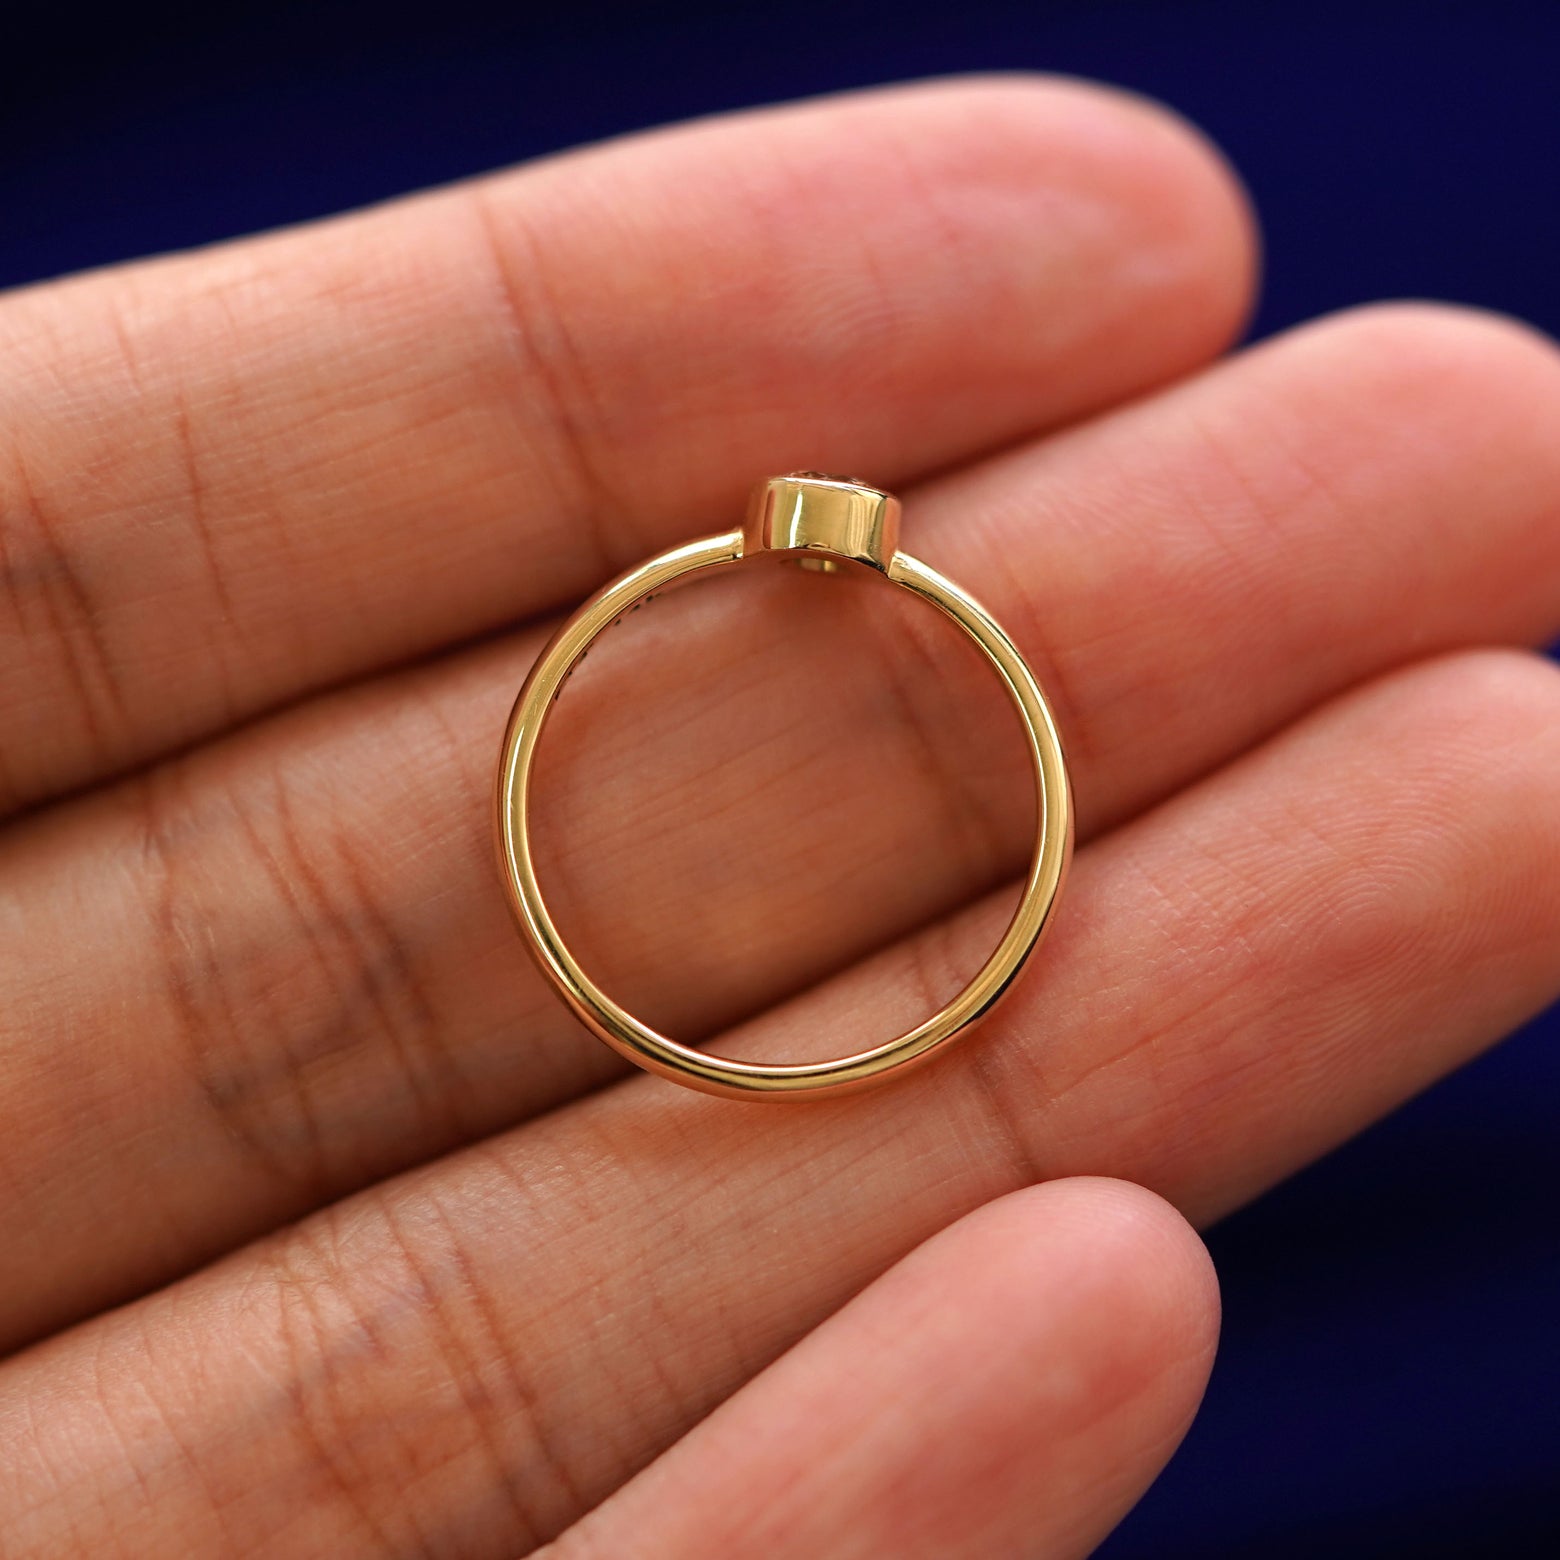 A yellow gold 1/3ct Diamond Ring in a model's hand showing the thickness of the band